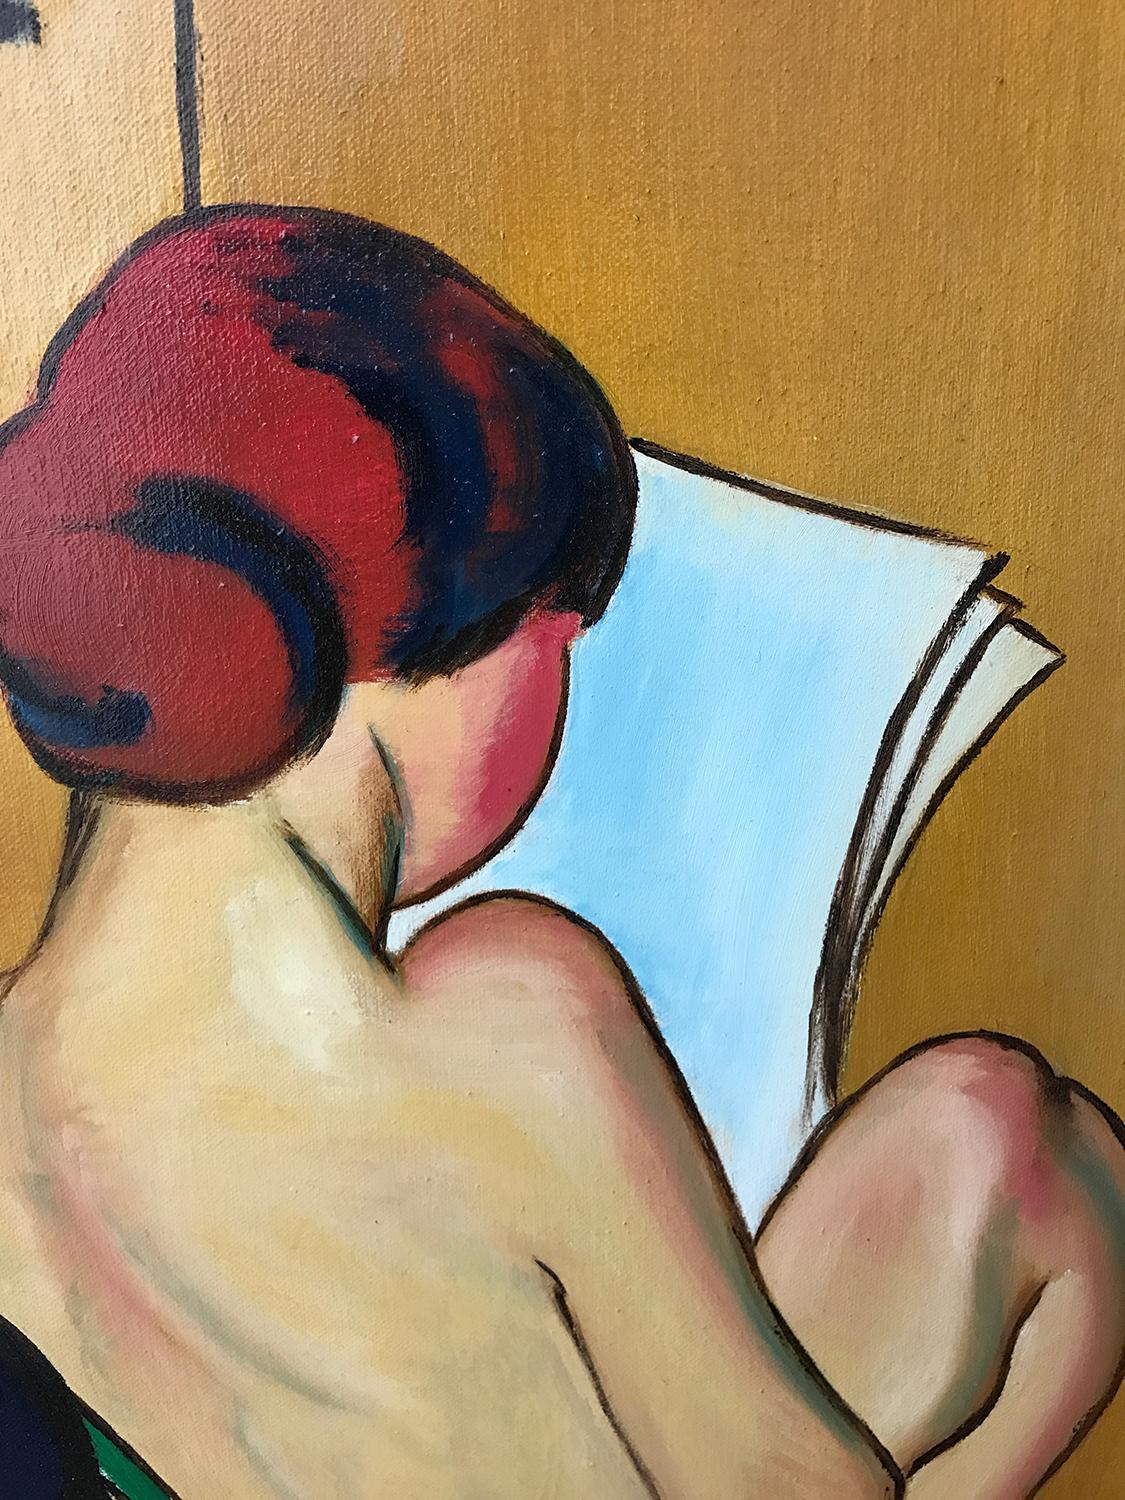 signed M.H; Nude reading; oil on canvas - Brown Nude Painting by Unknown